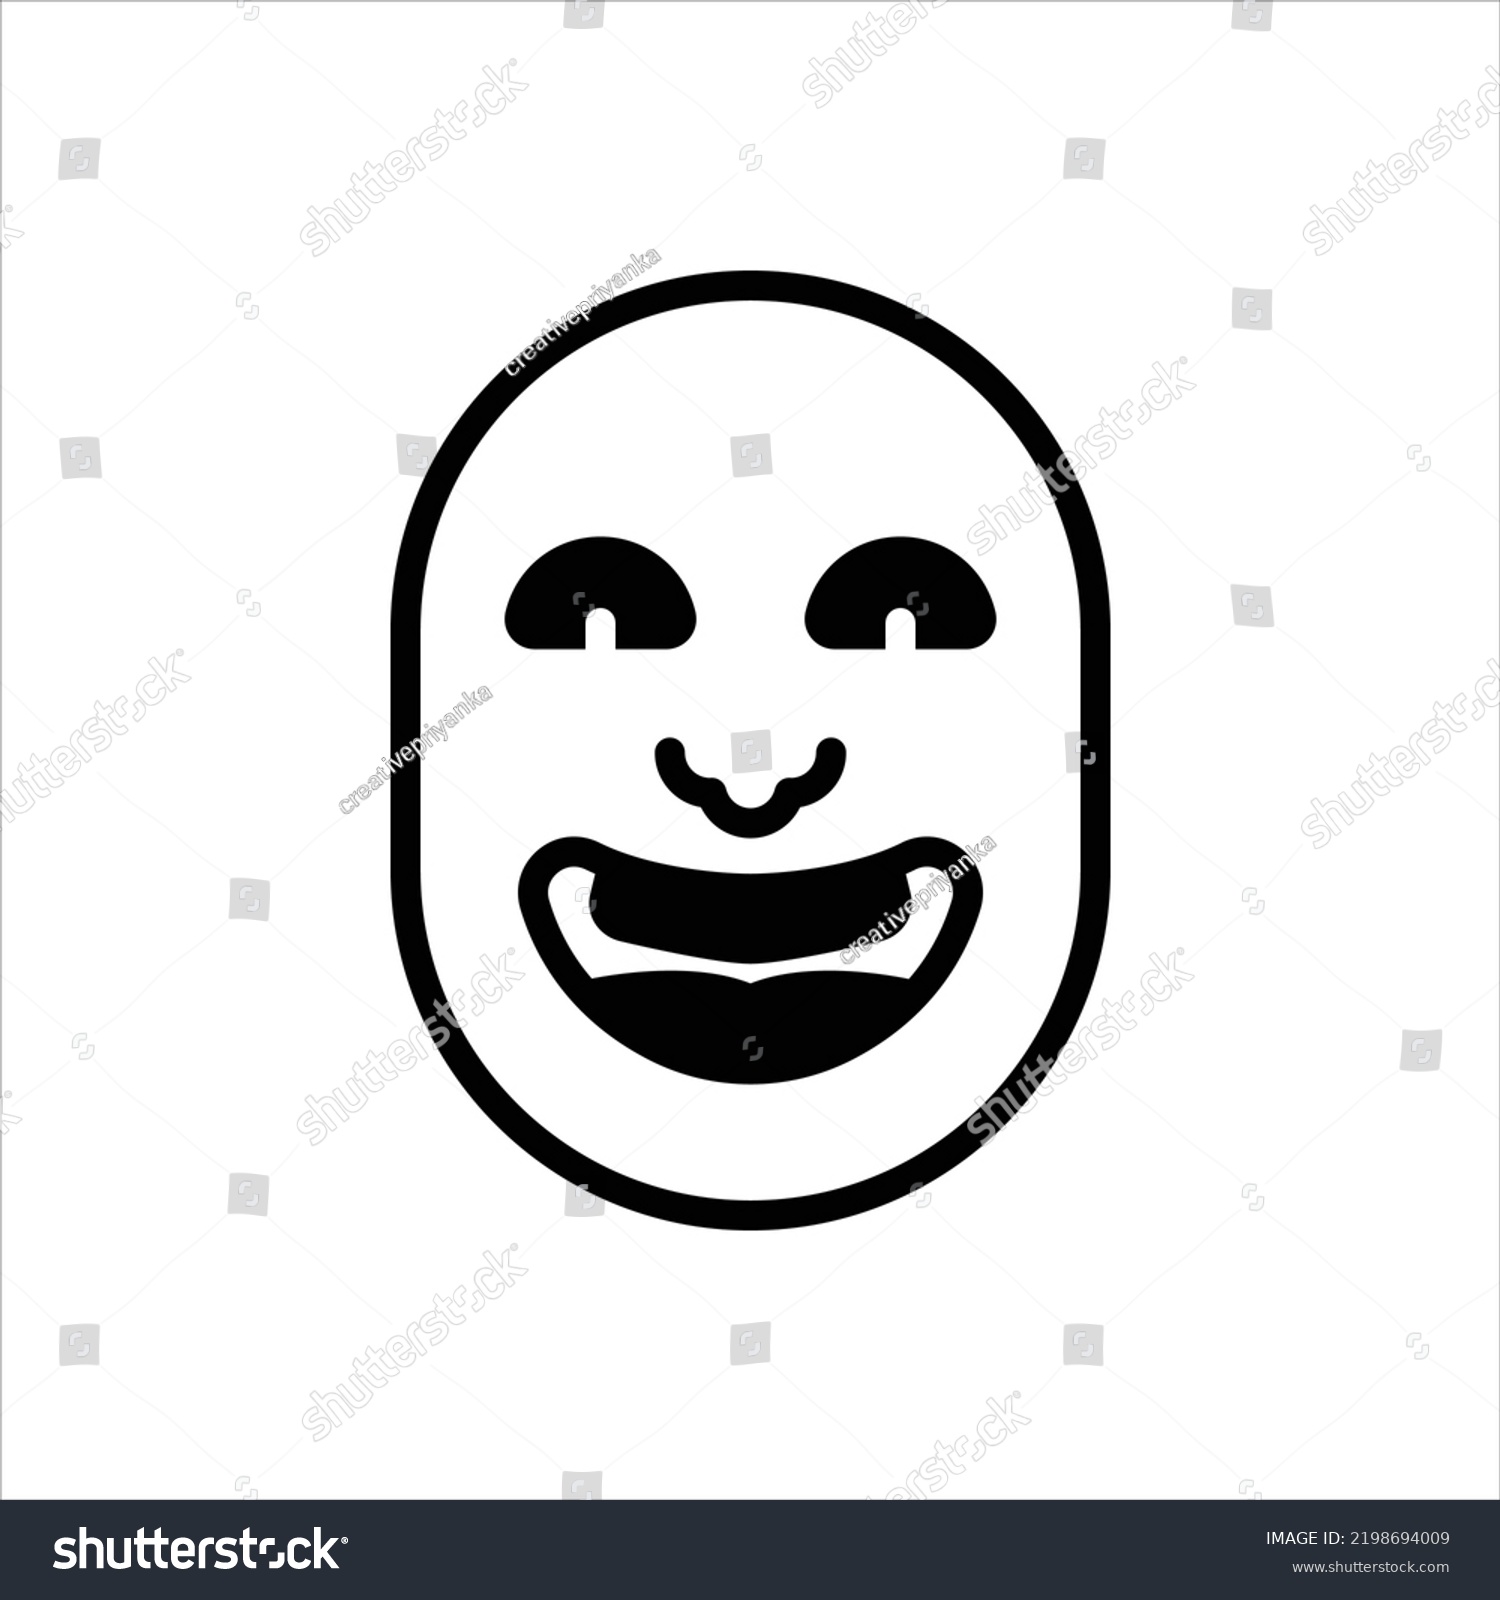 Vector black icon for humor - Royalty Free Stock Vector 2198694009 ...